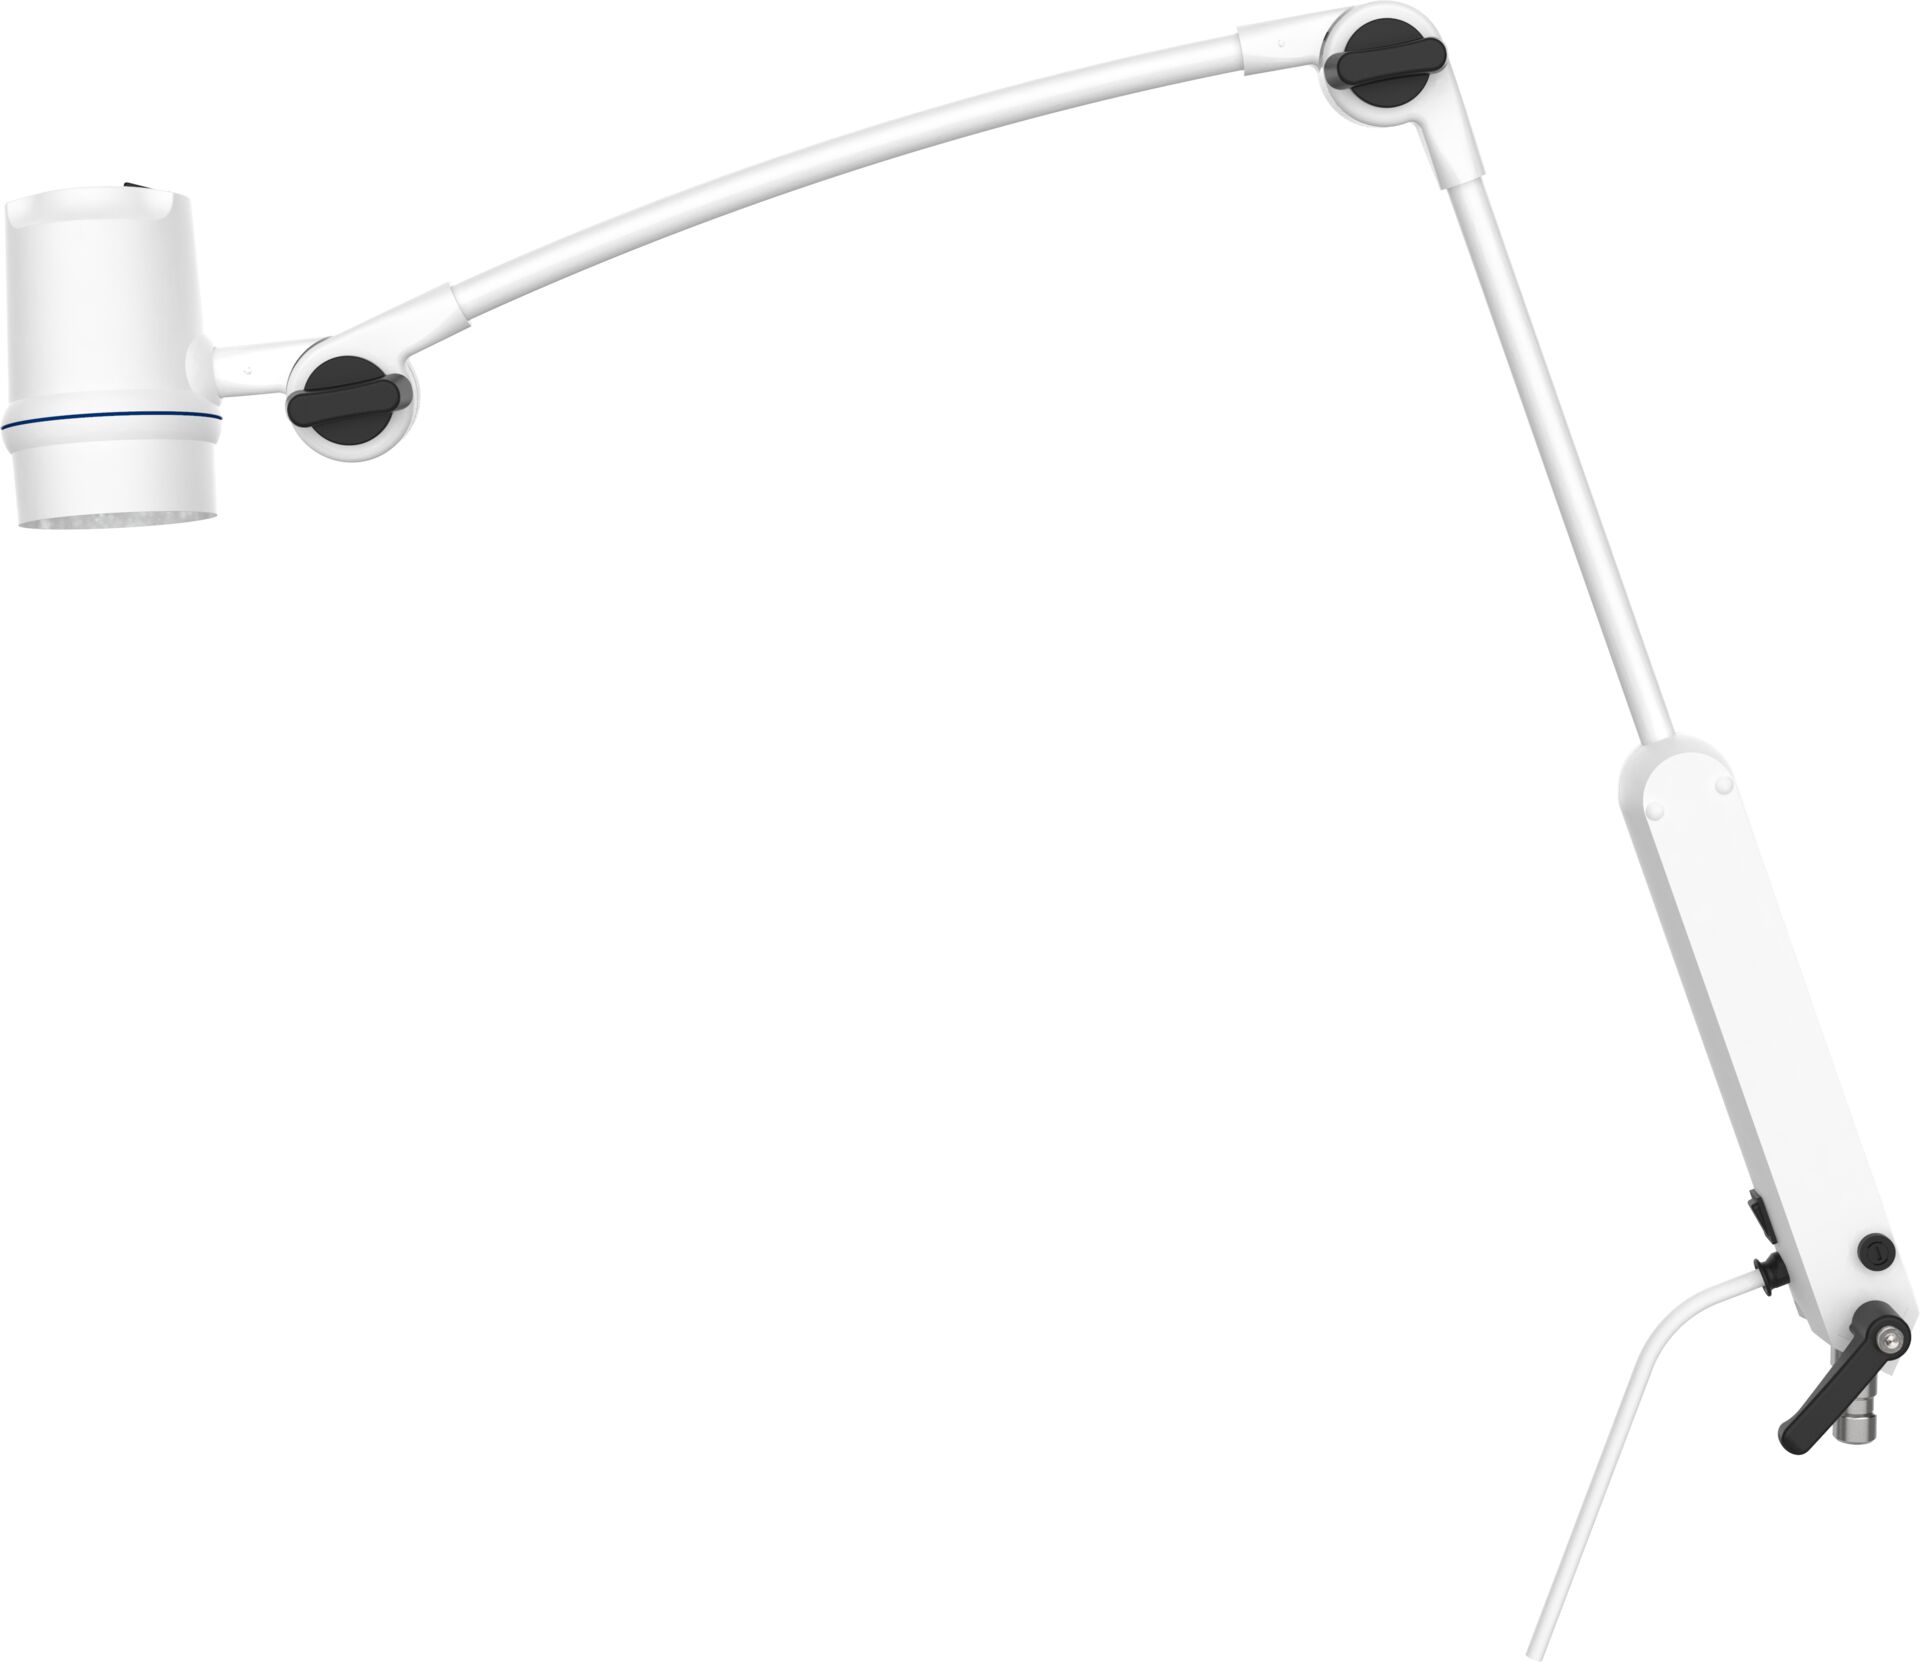 LED - Lamp with double-joint articulated arm